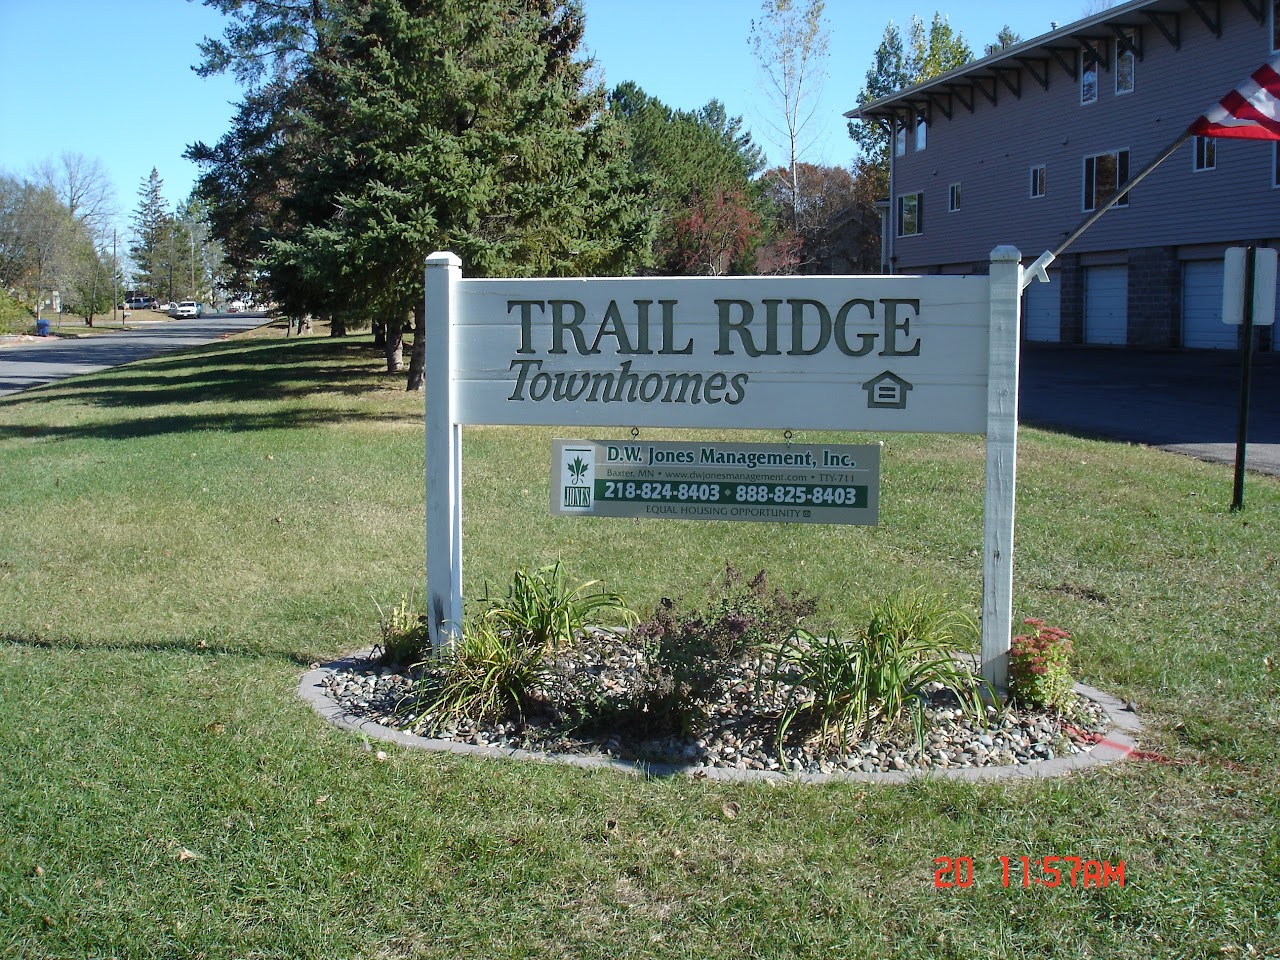 Photo of TRAIL RIDGE. Affordable housing located at MULTIPLE BUILDING ADDRESSES BRAINERD, MN 56401